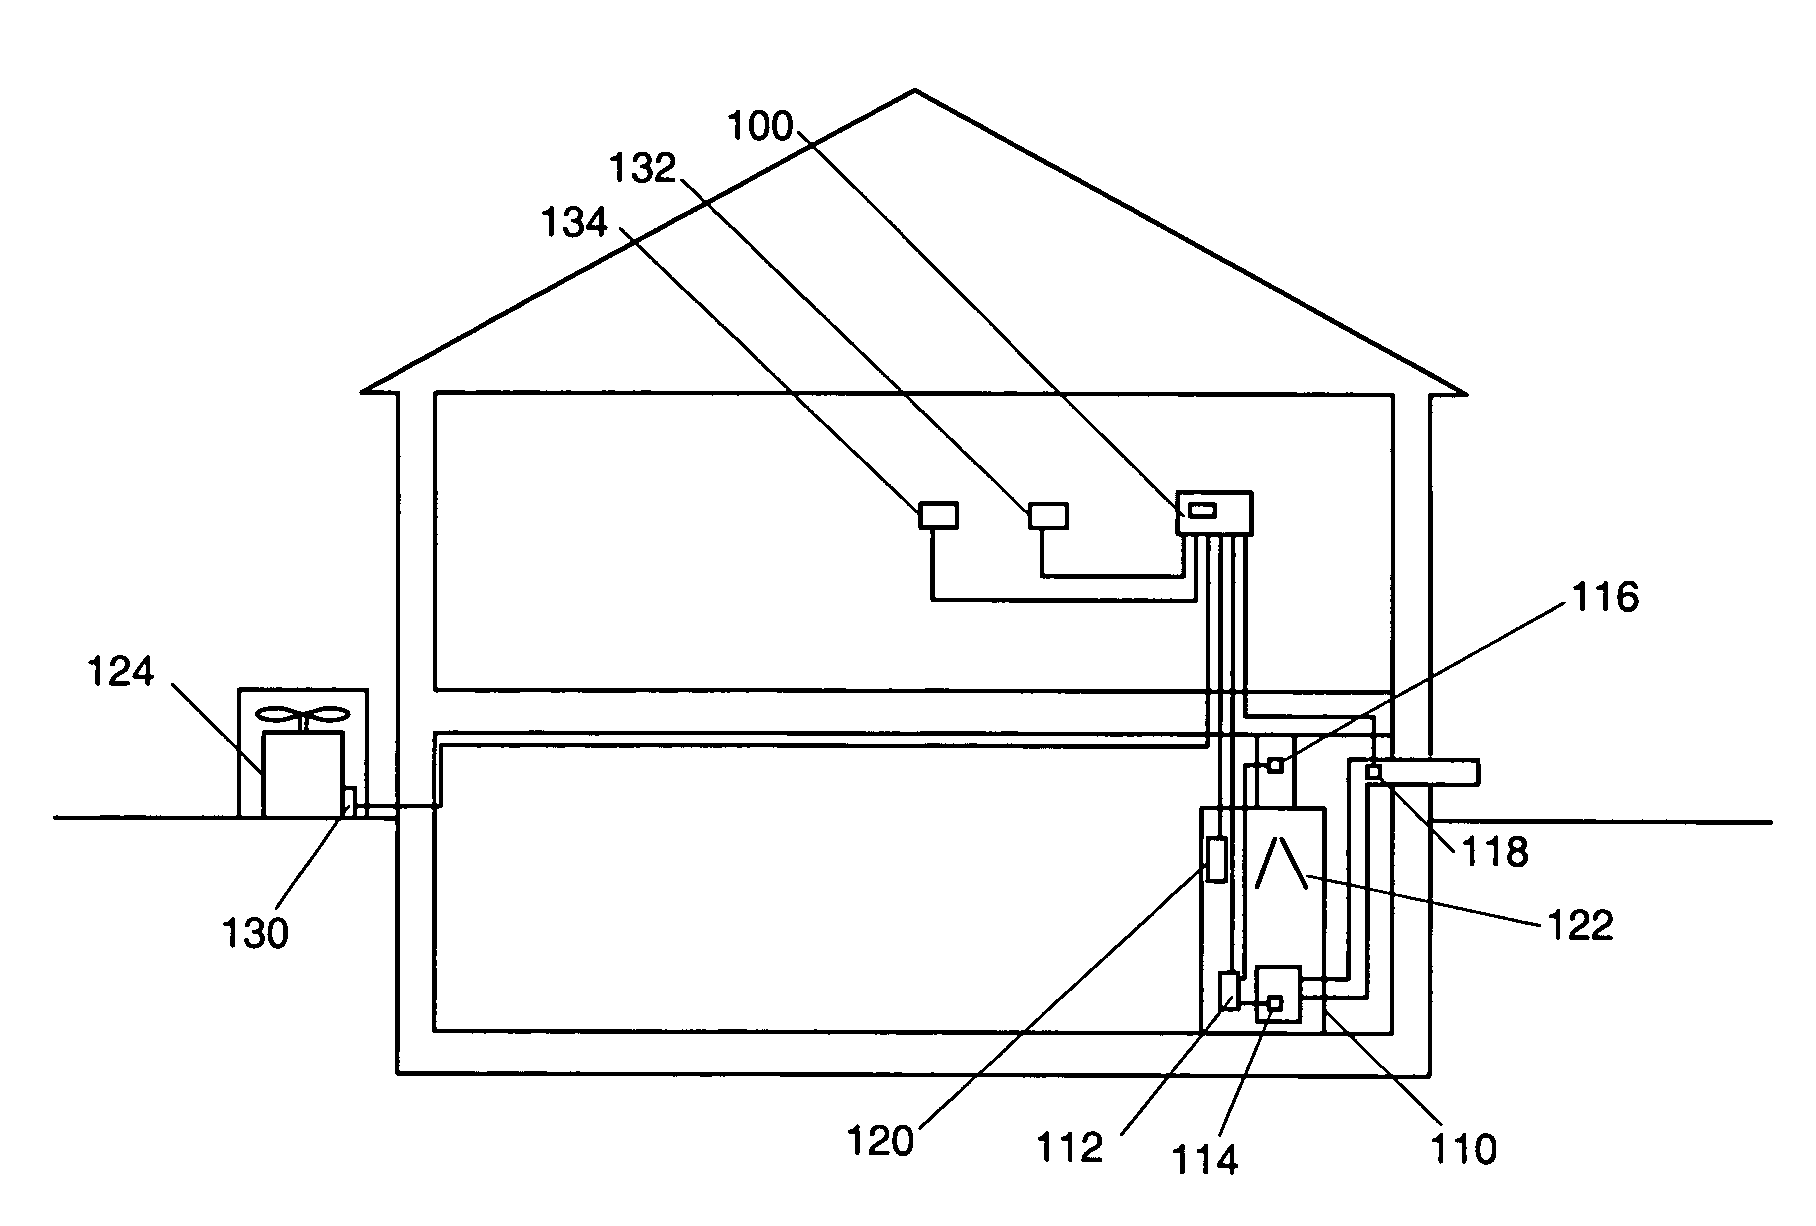 Thermostat responsive to inputs from external devices